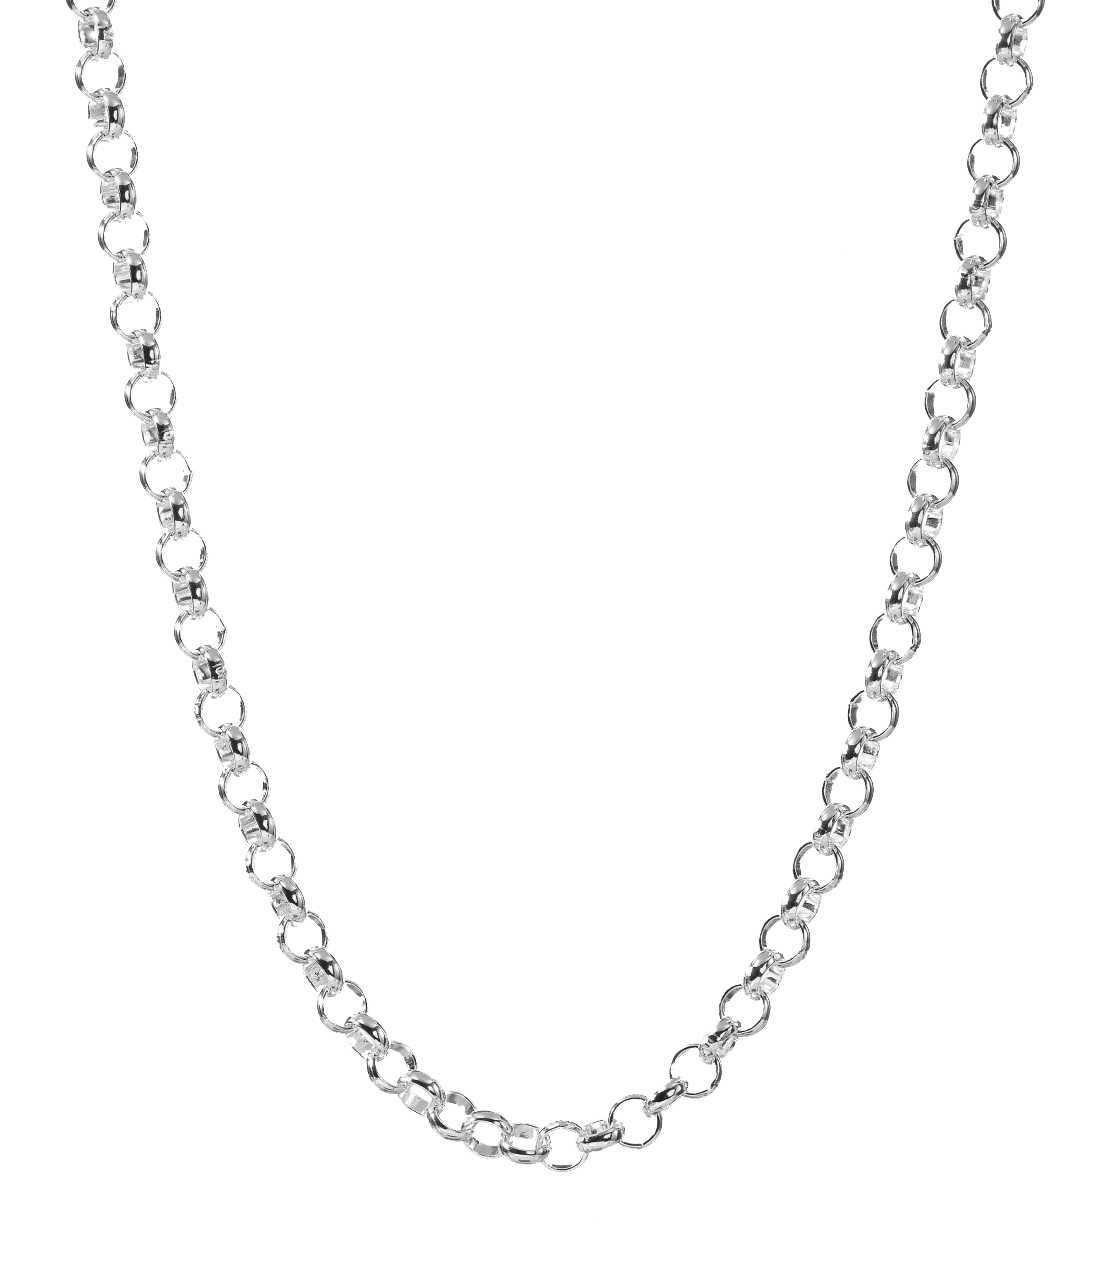 Chain Necklace Png Necklace Png N Intended Idea - Chain, Transparent background PNG HD thumbnail